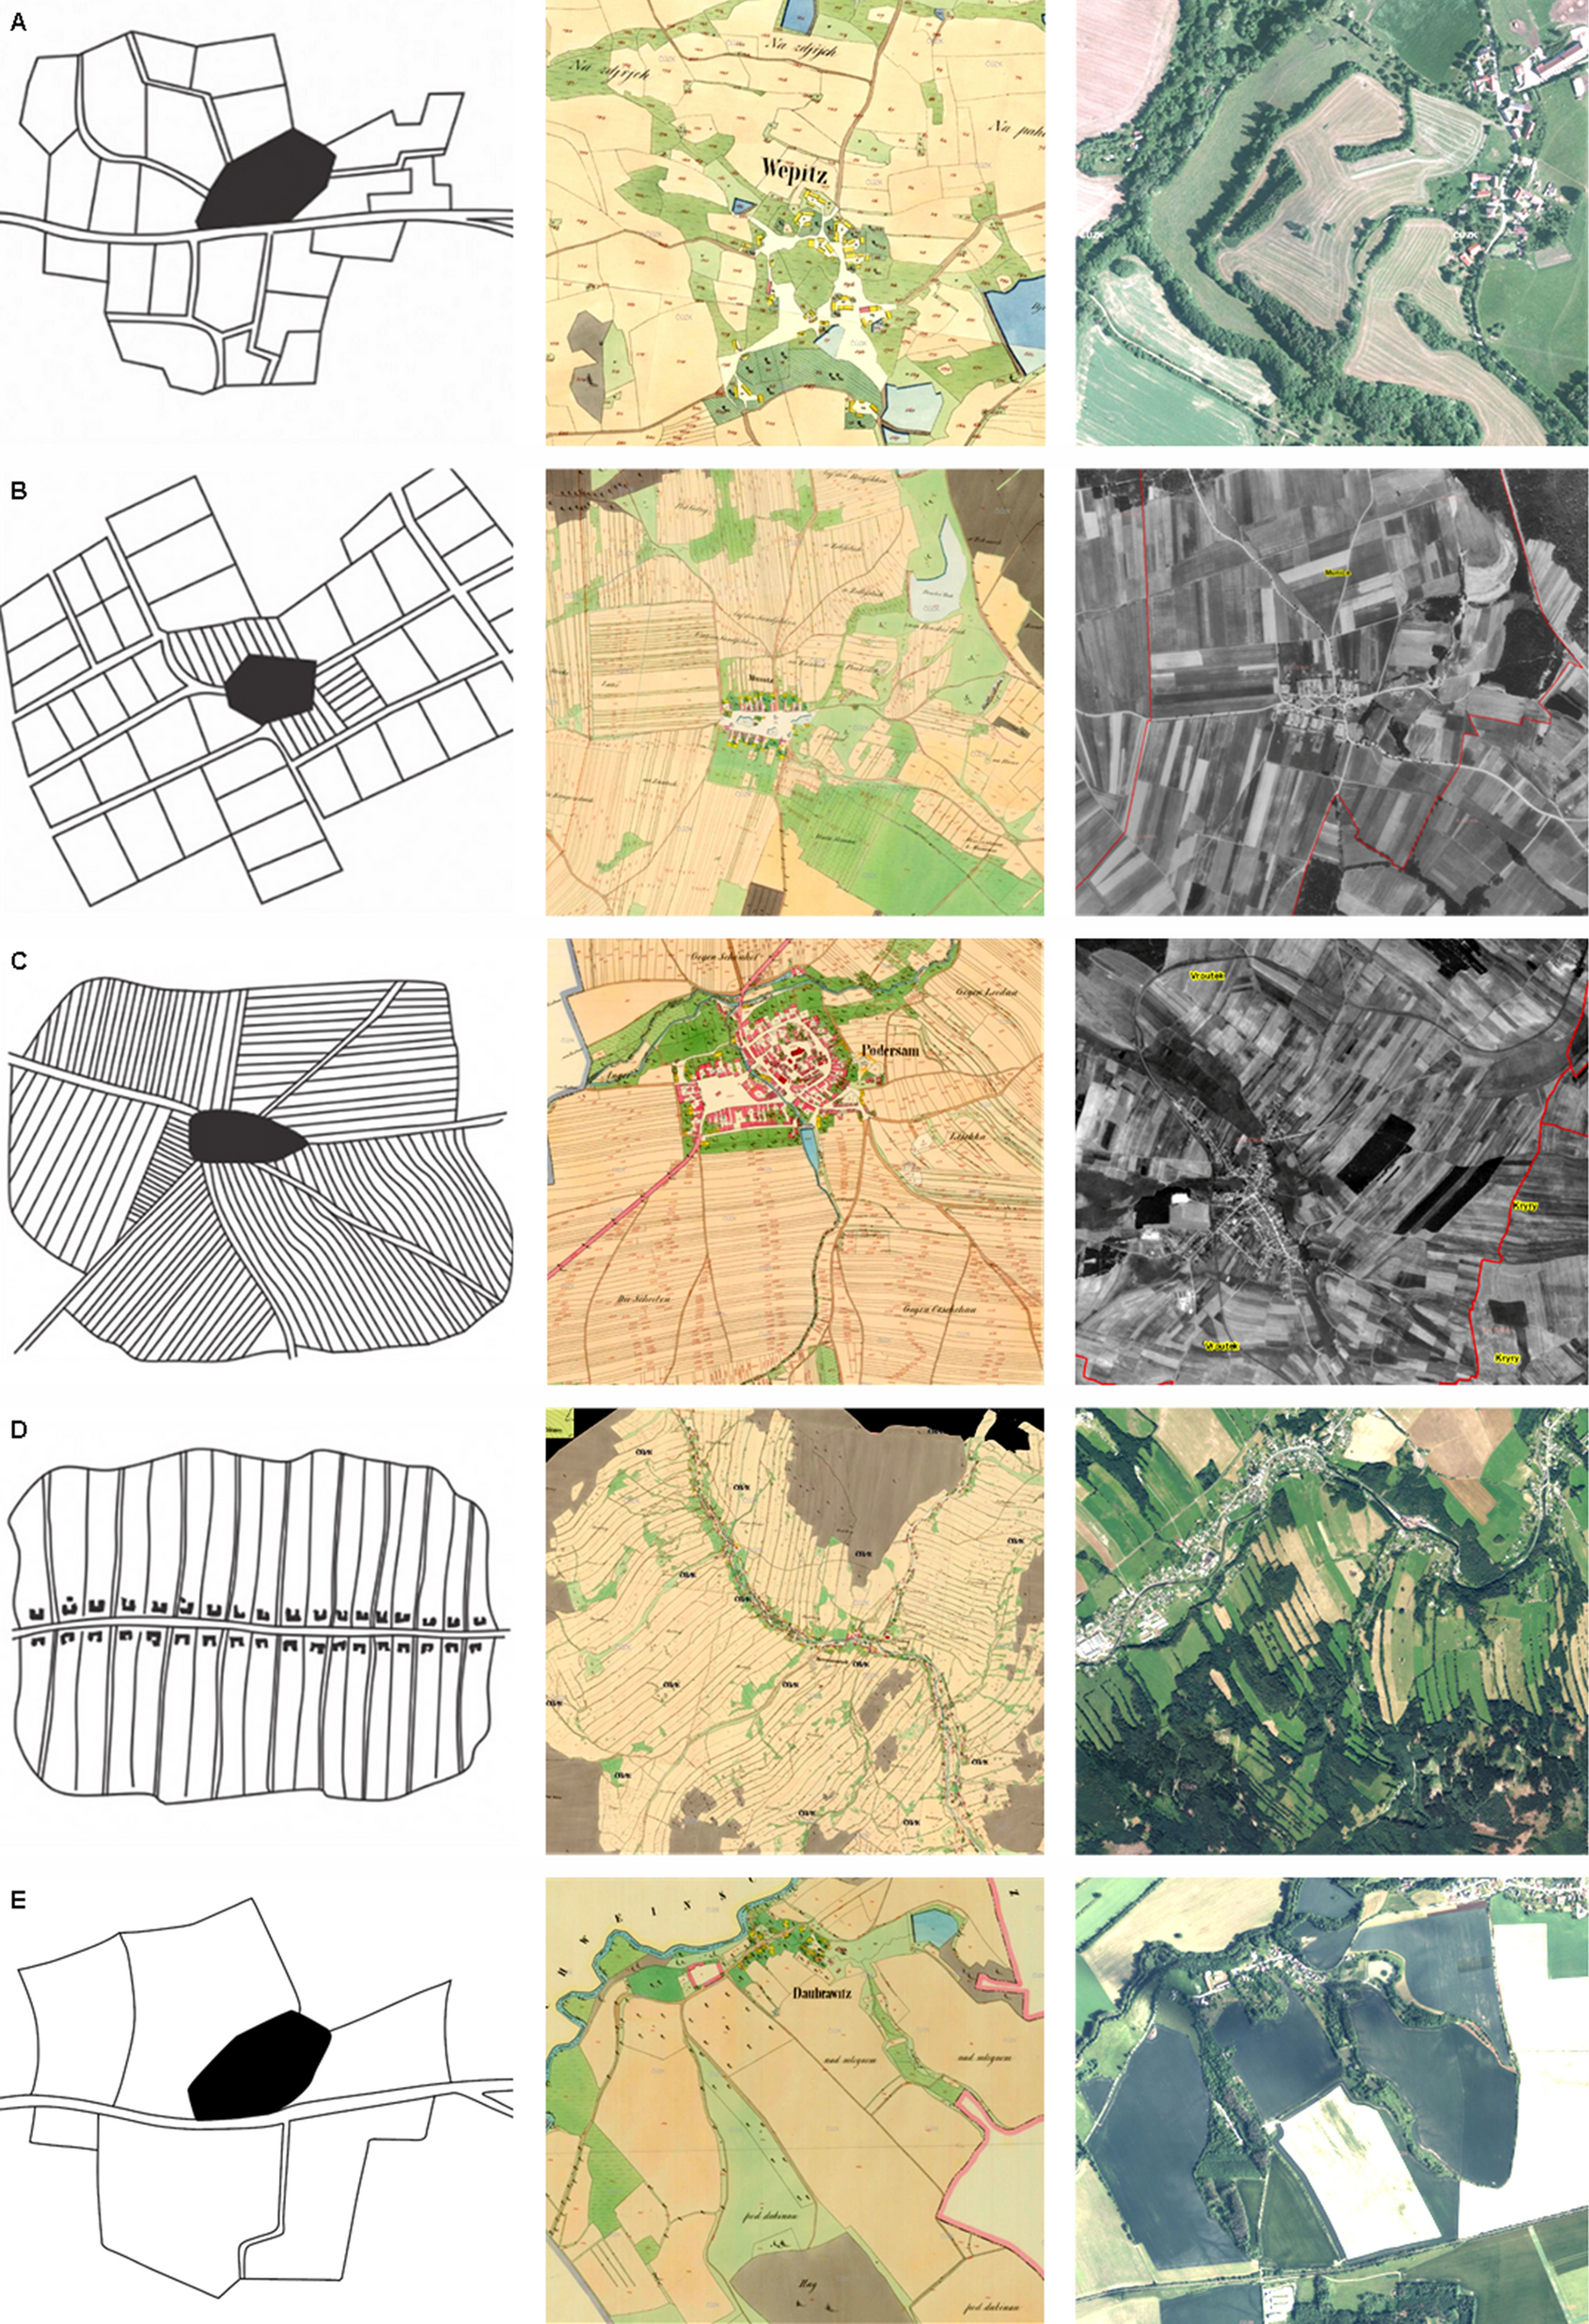 Ecological and historical factors behind the spatial structure of the  historical field patterns in the Czech Republic | Scientific Reports